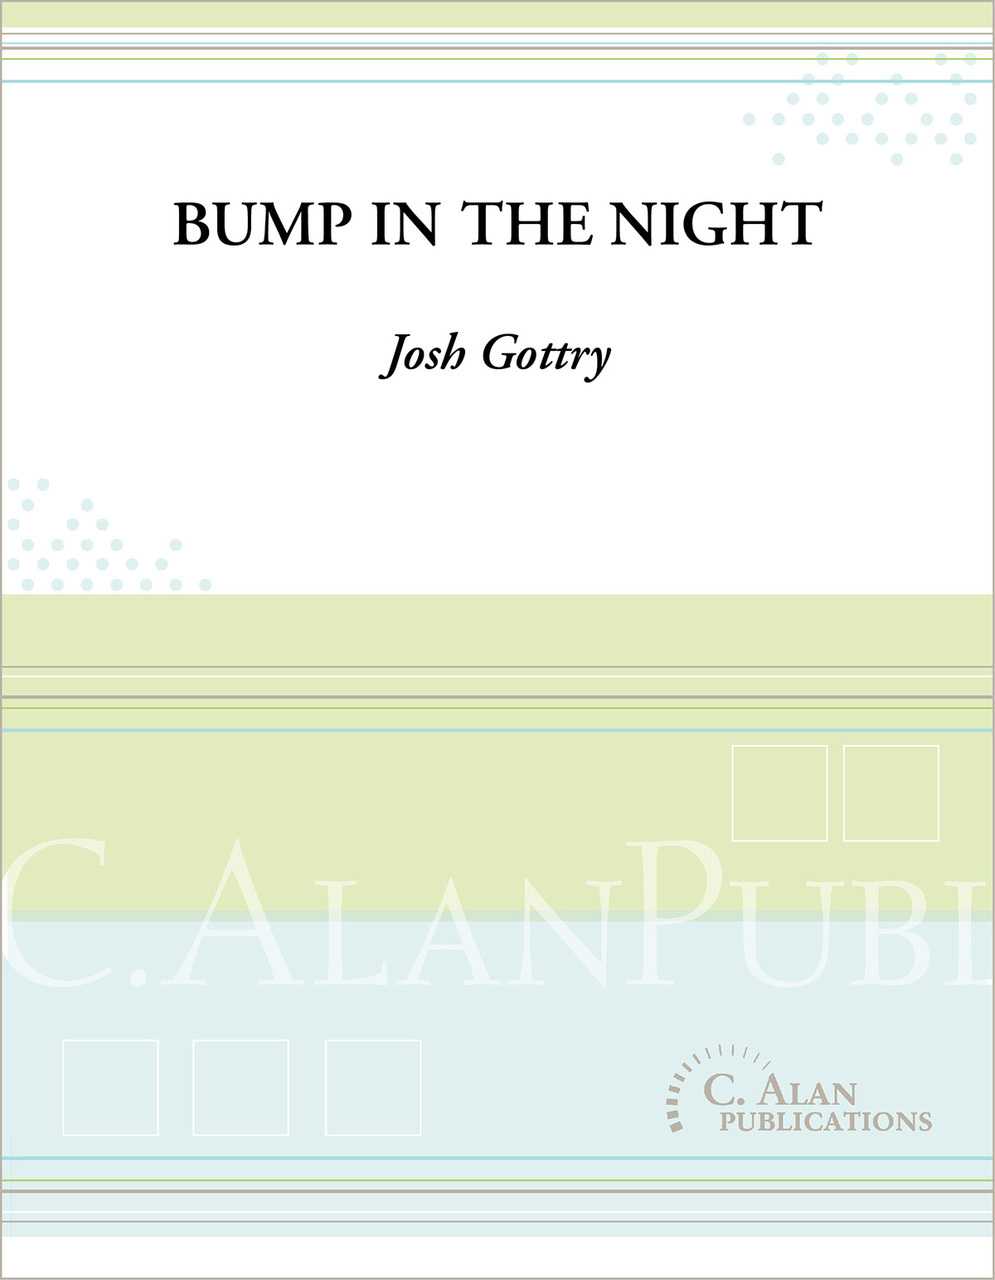 Bump in the Night by Josh Gottry